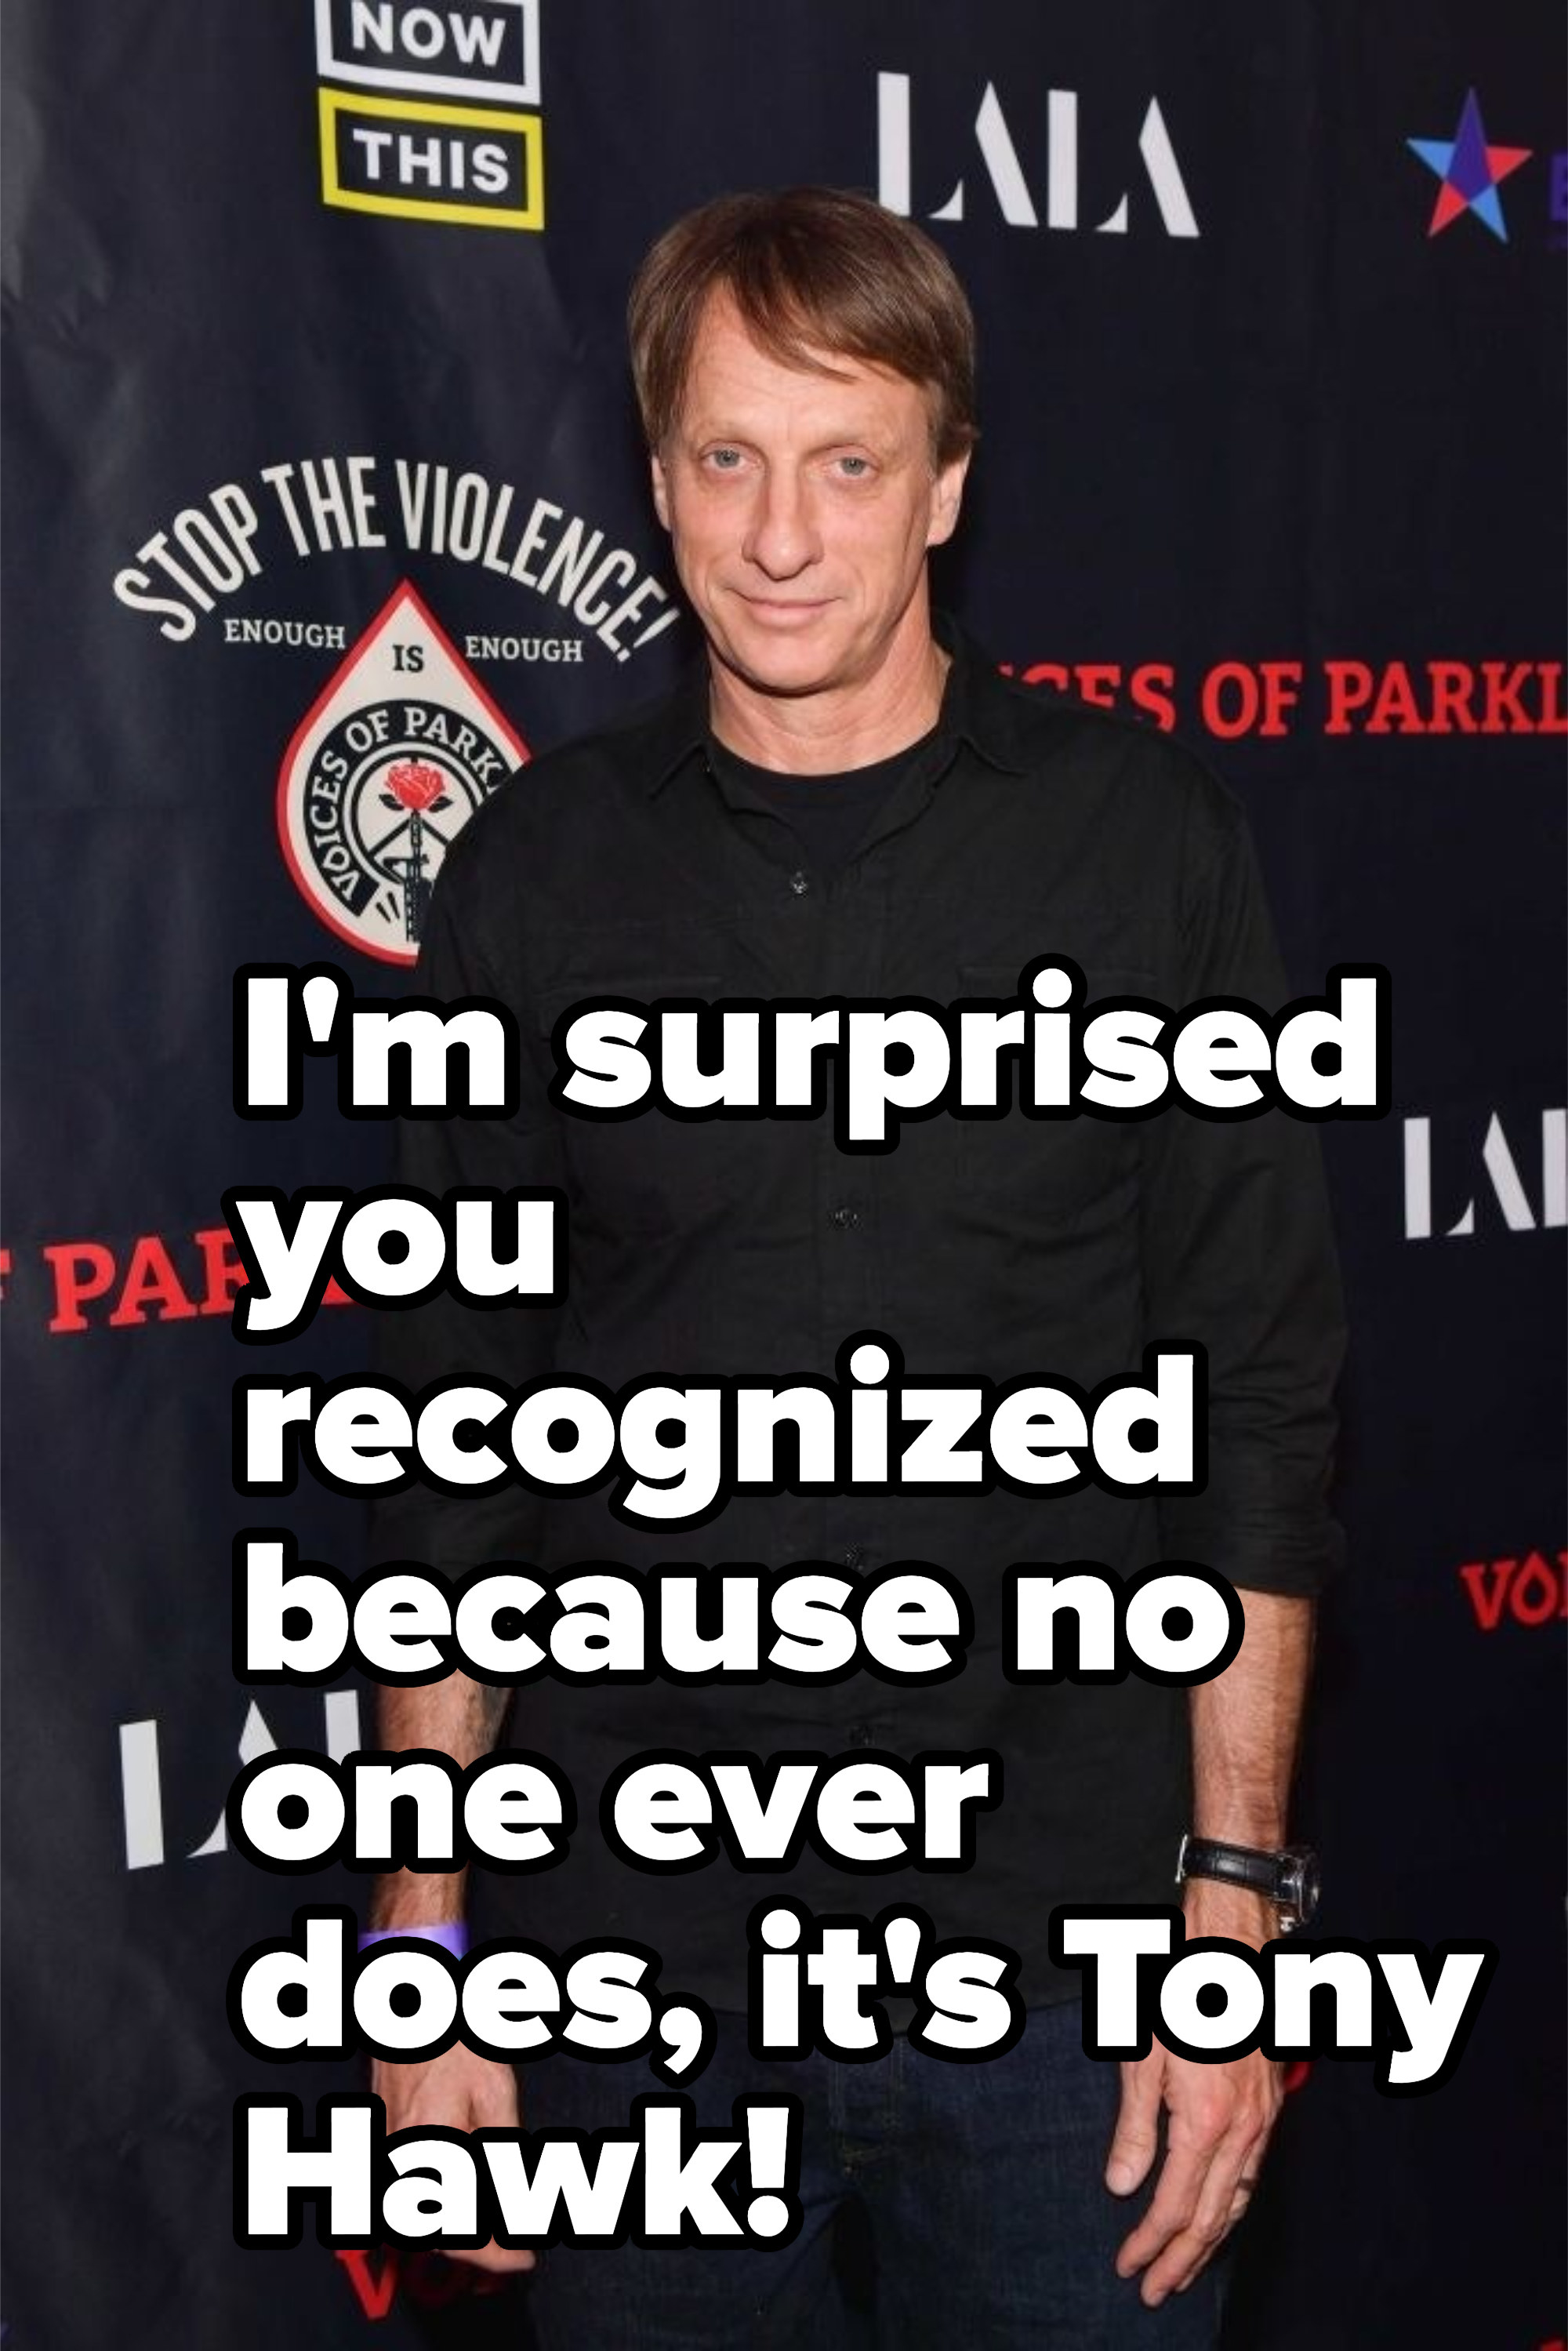 Tony hawk is in a black shirt on a red carpet